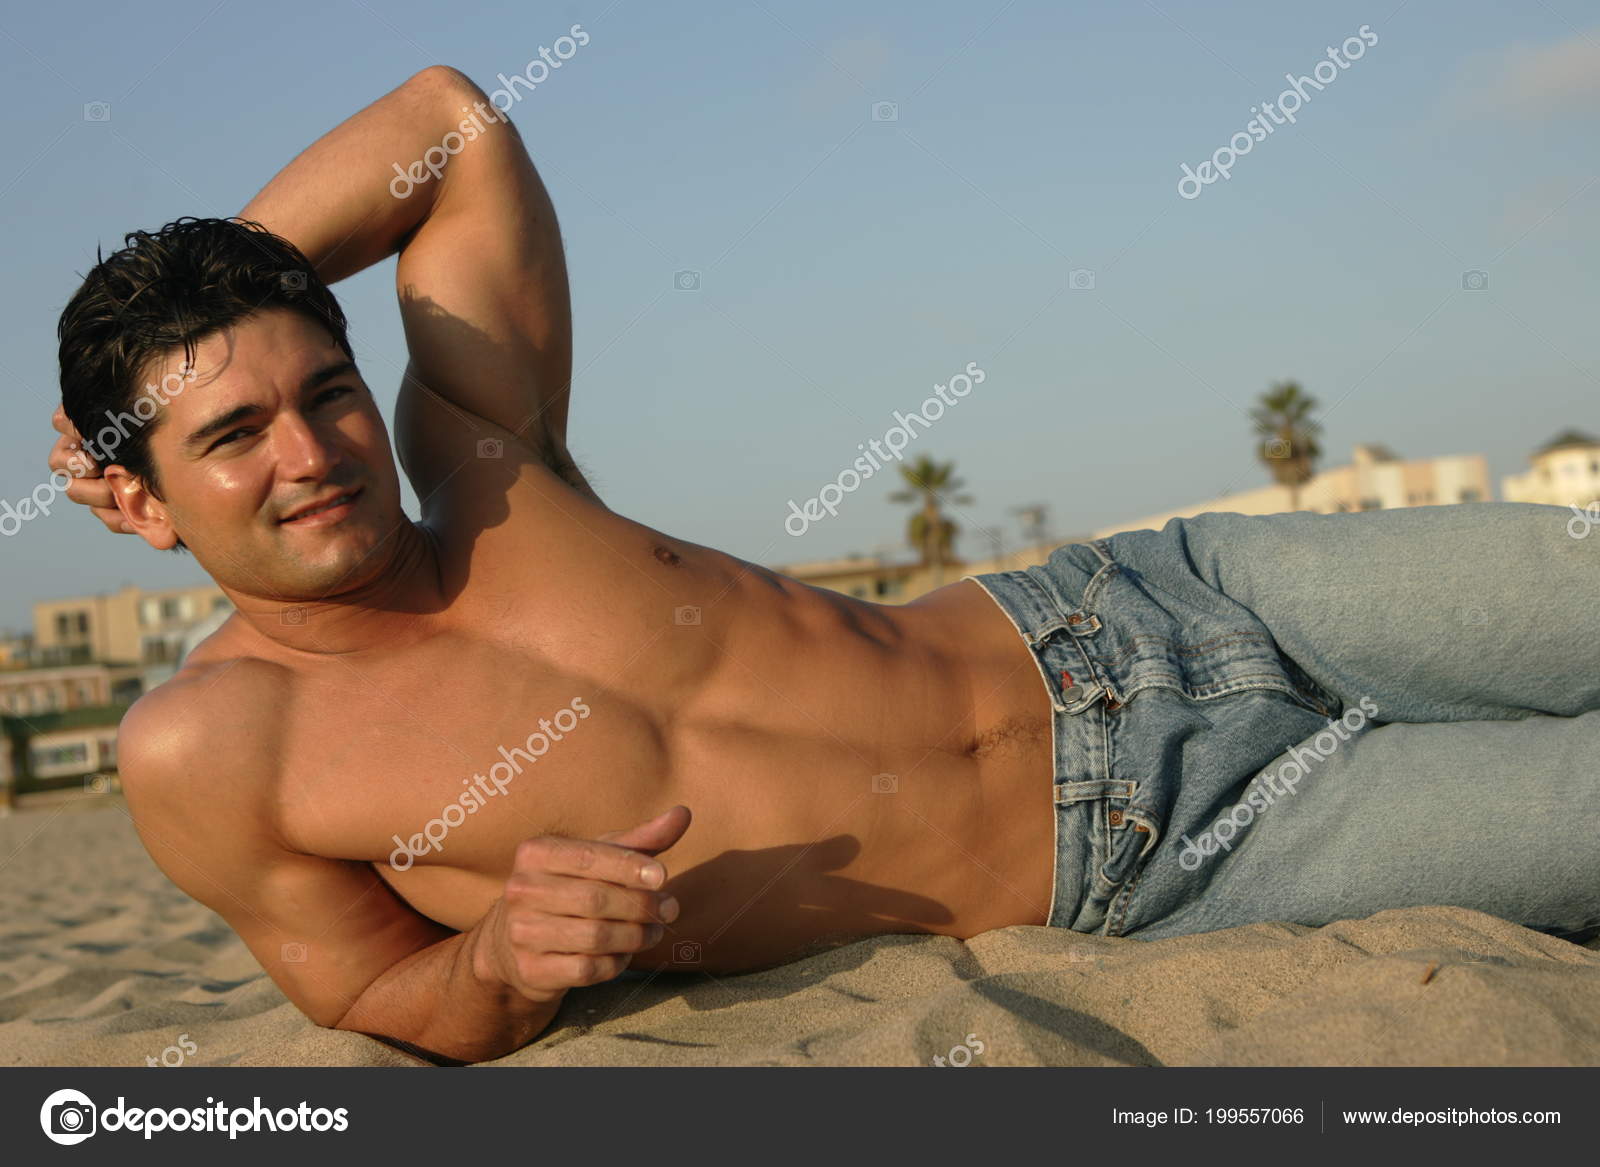 Page 29 | Men On The Beach Images - Free Download on Freepik